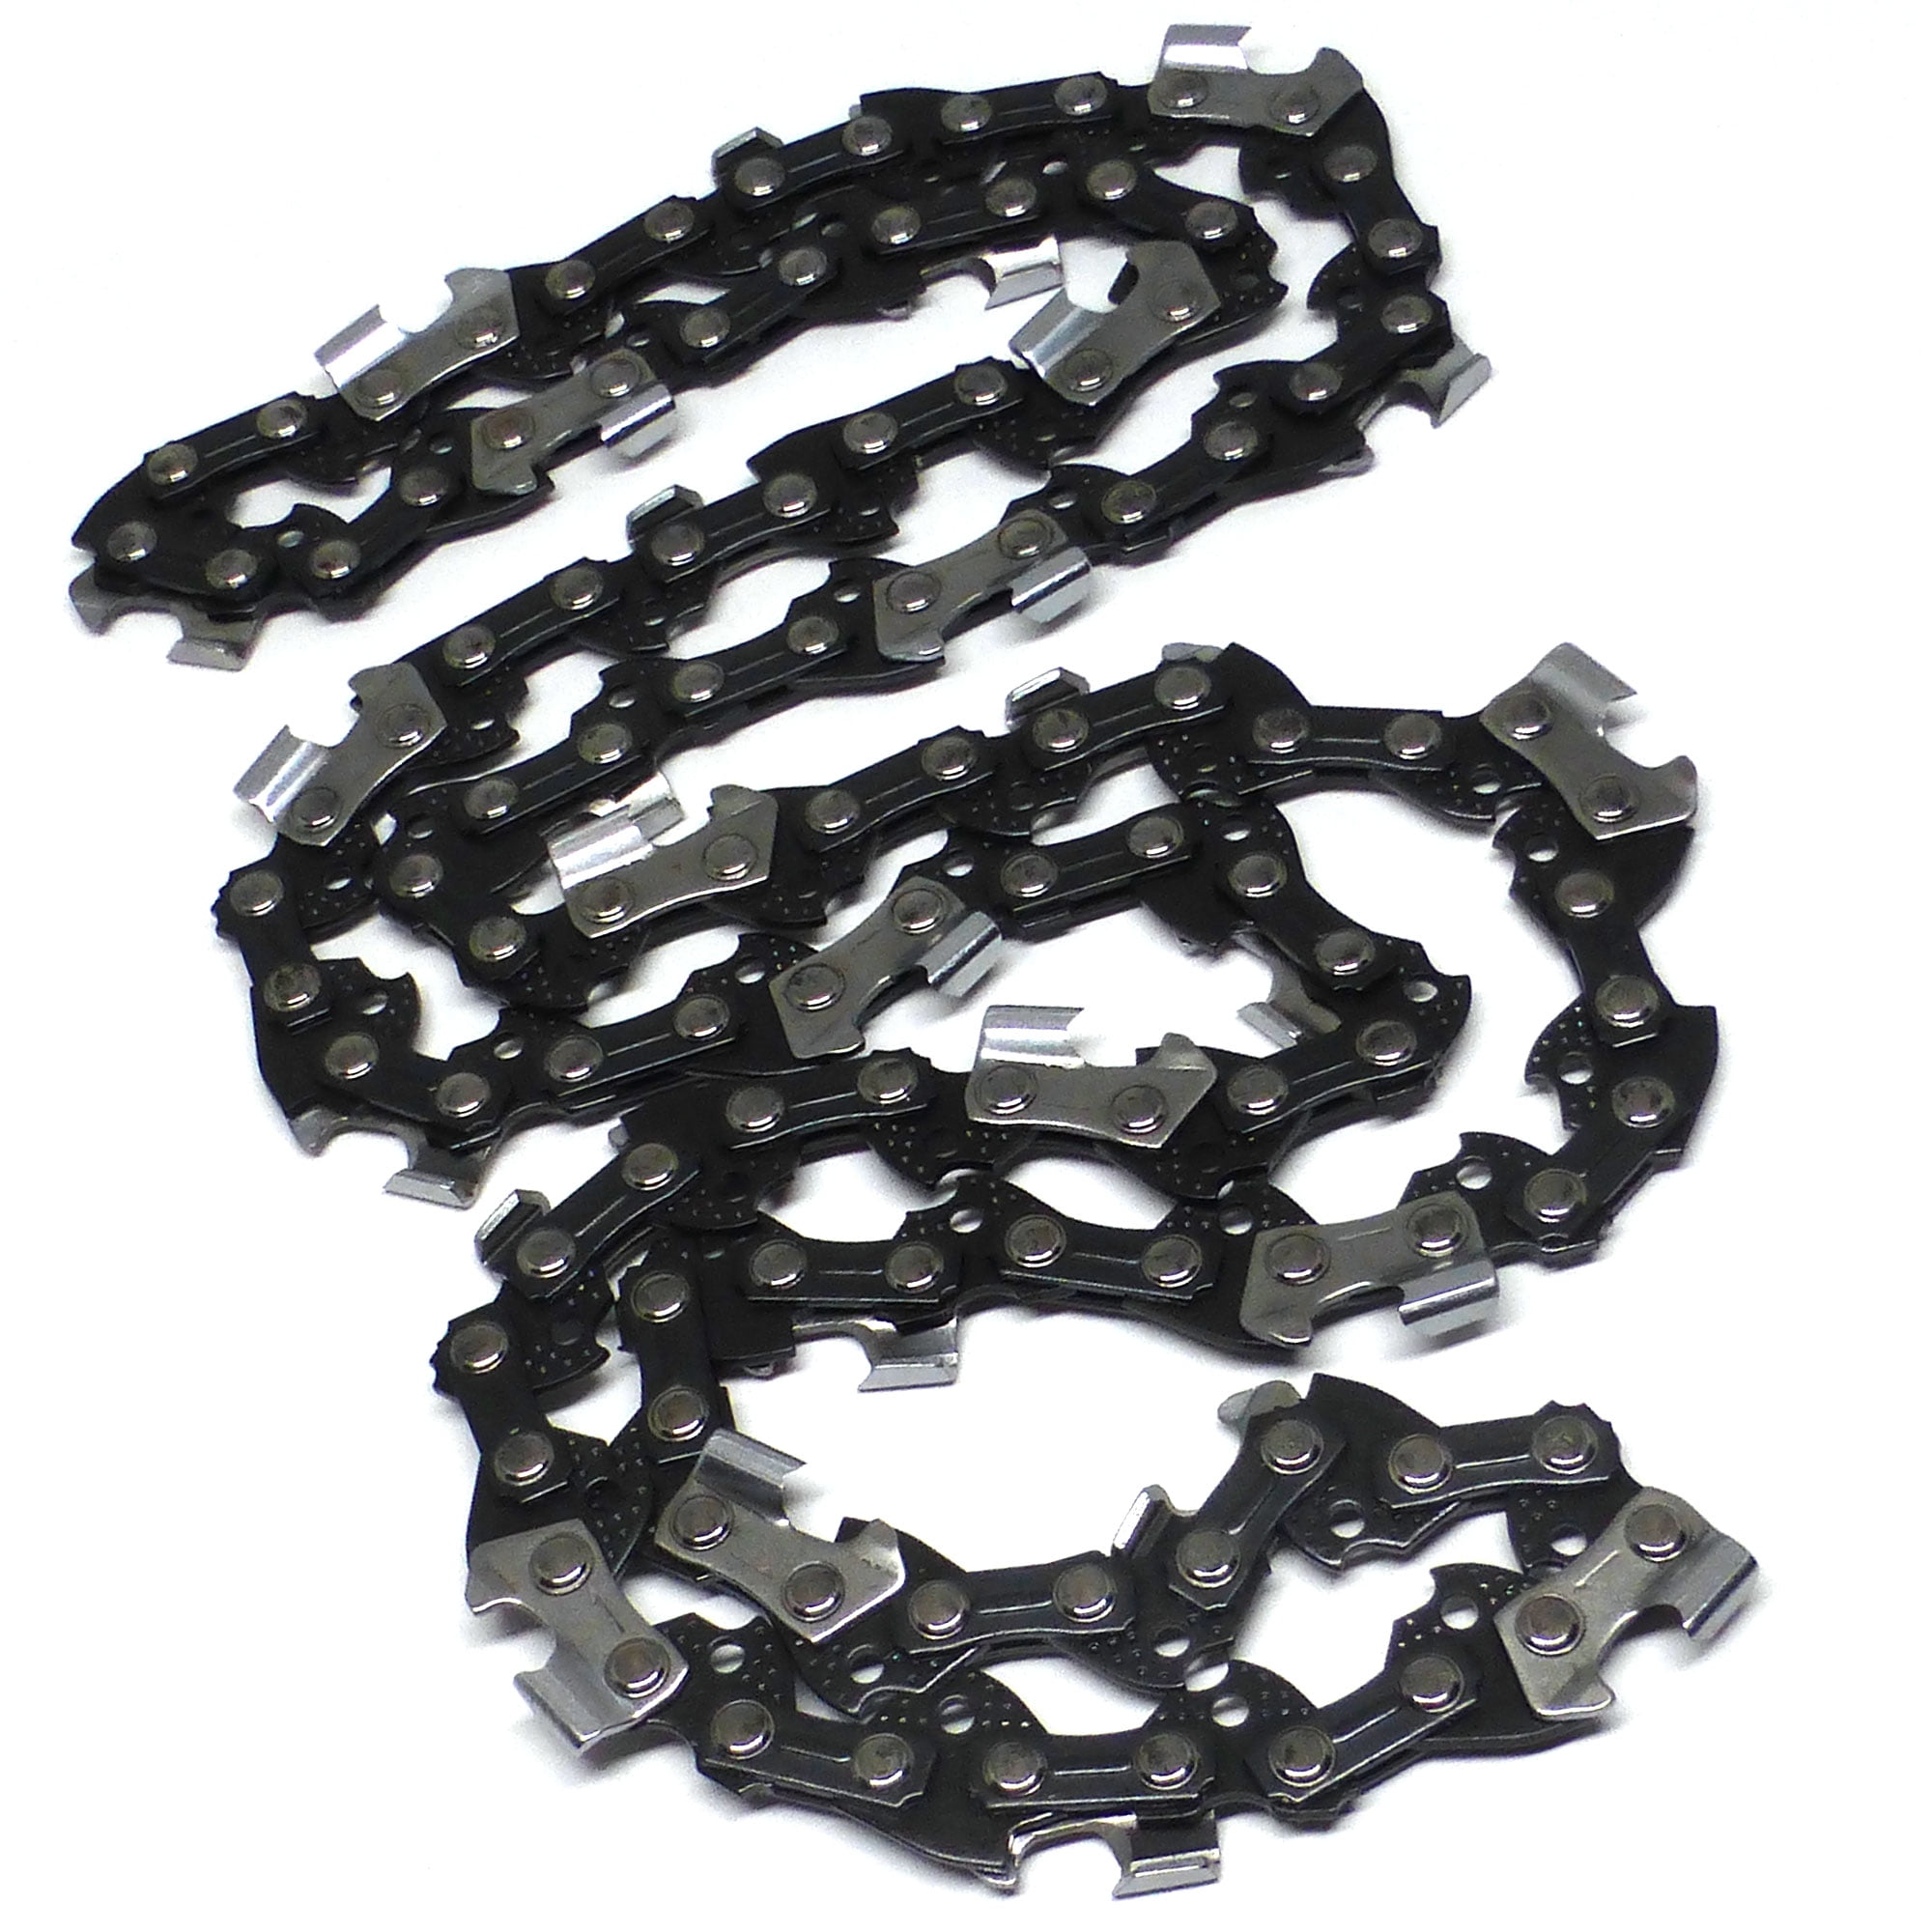 16" Ripping Chain for Stihl MS181 MS190 MS191 MS192 MS200 MS201   N4C10-RP-55E 